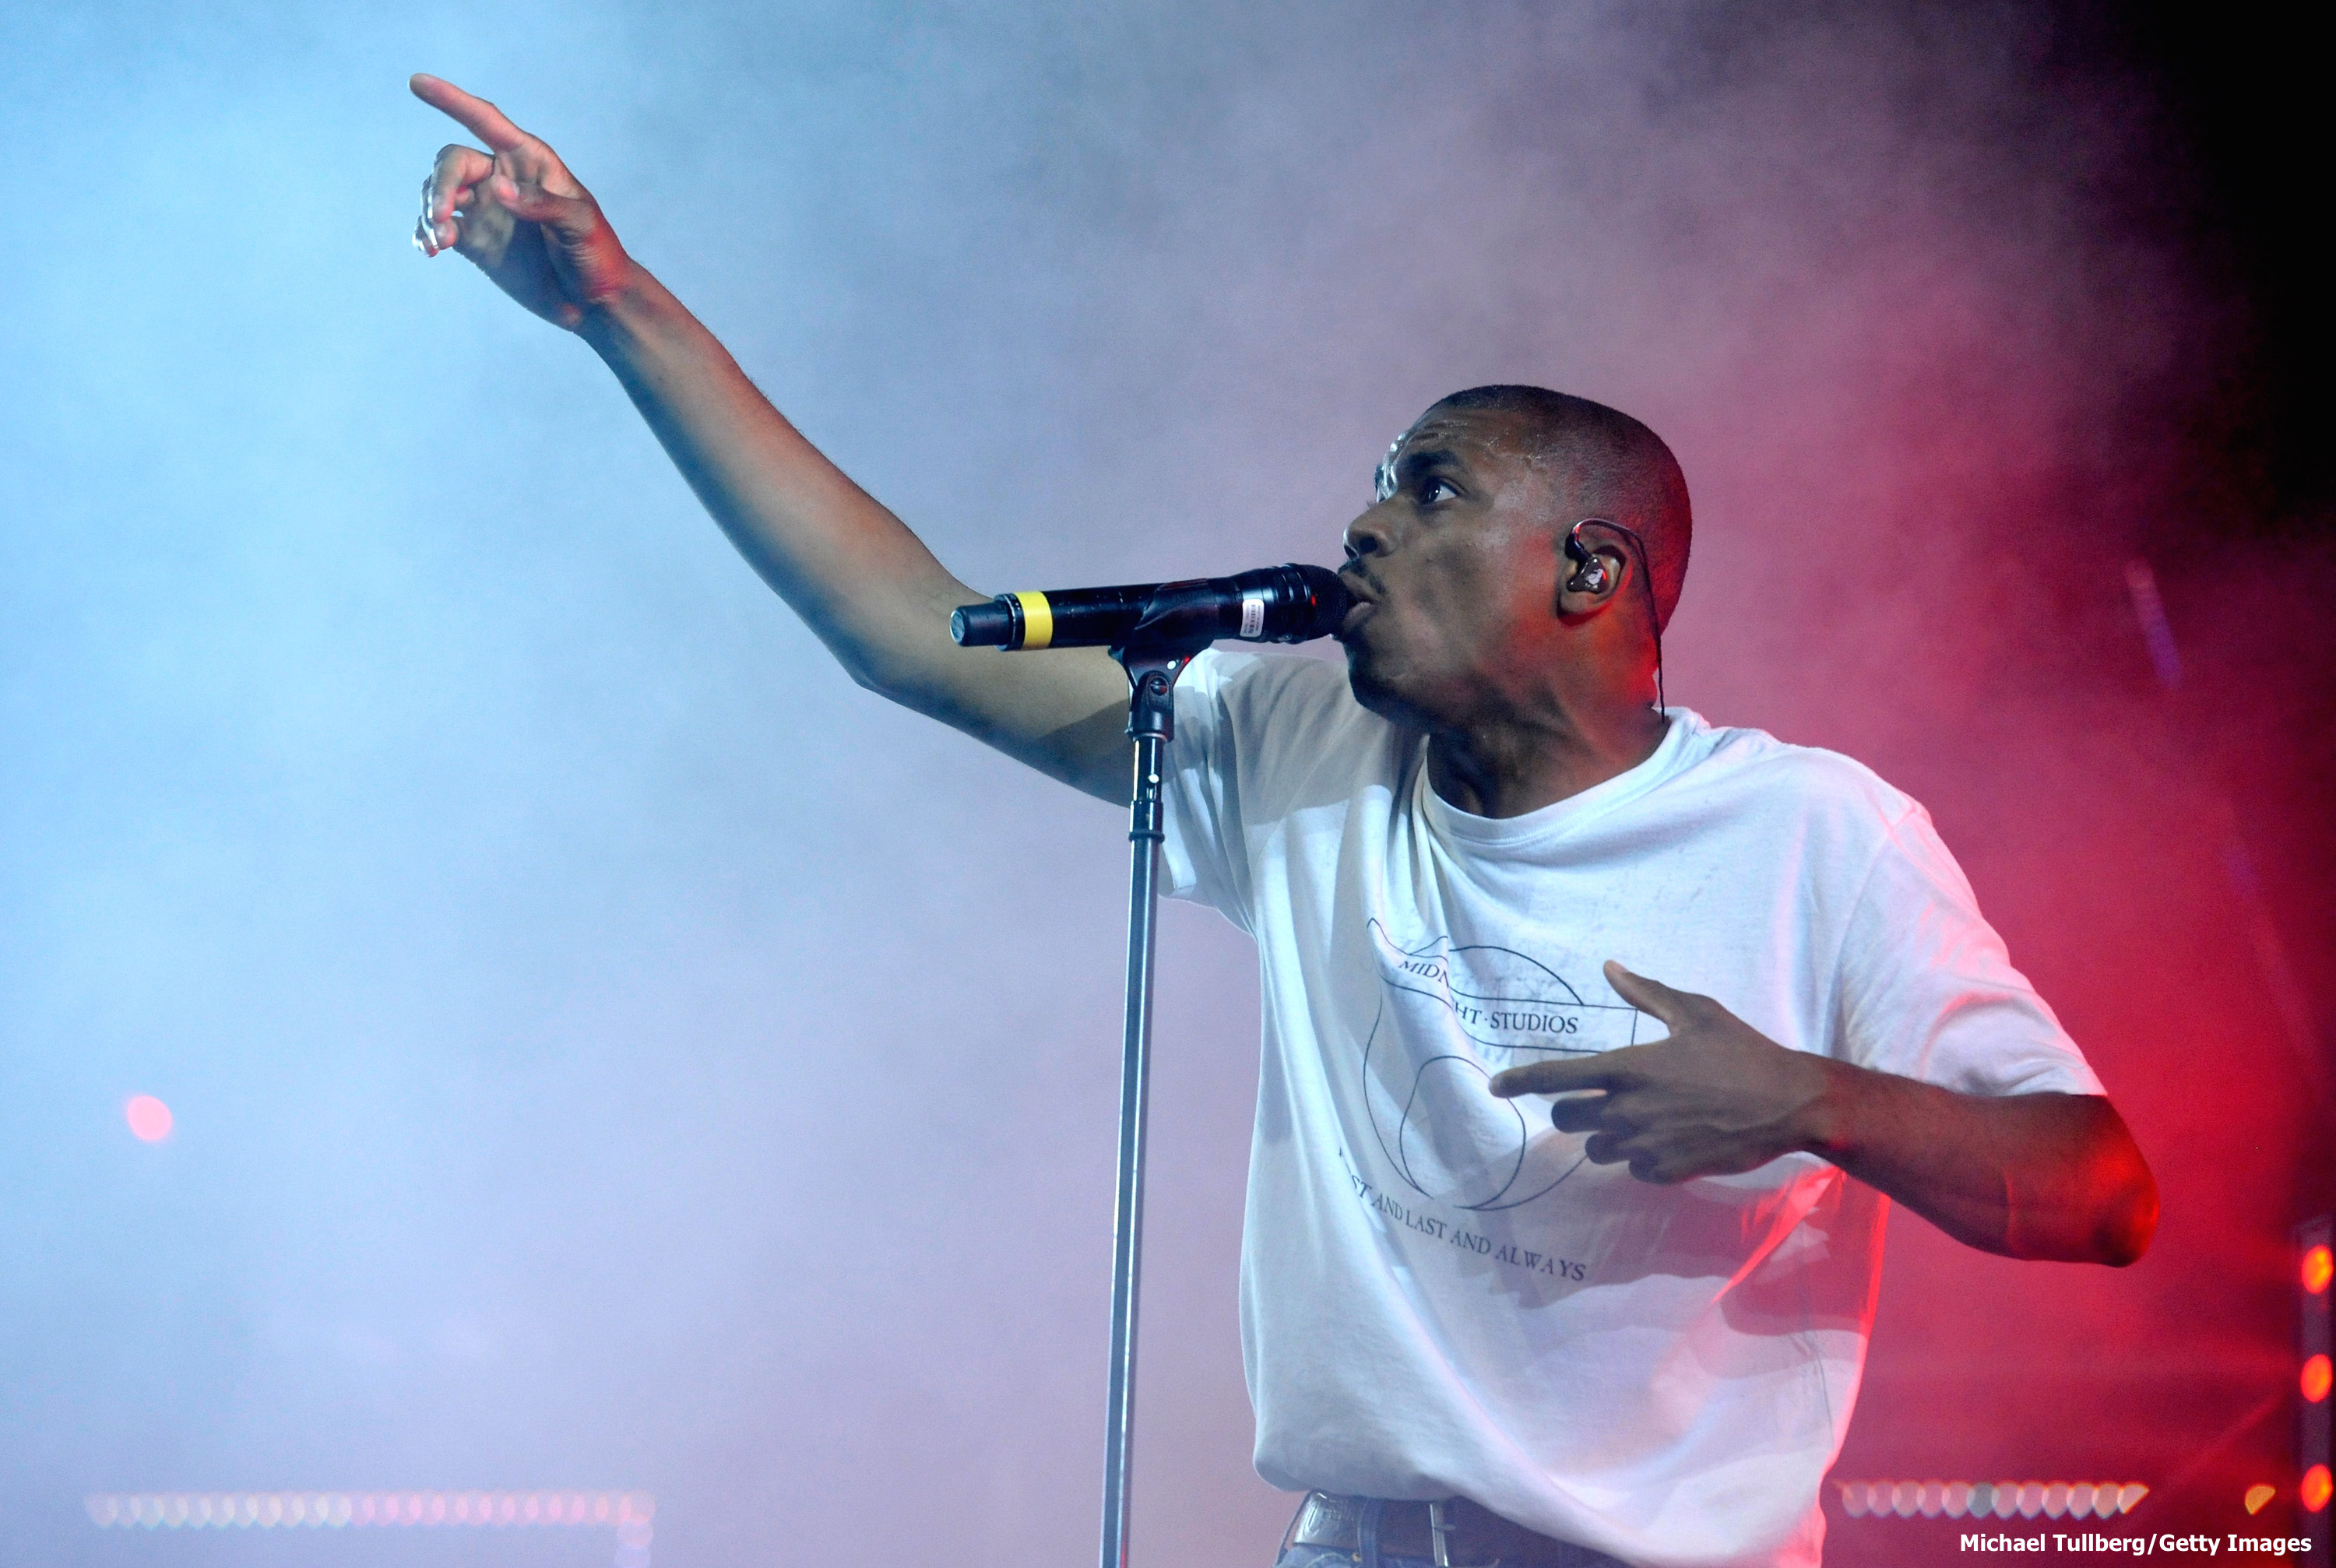 5 Things We Want From Vince Staples’ “Big Fish Theory”